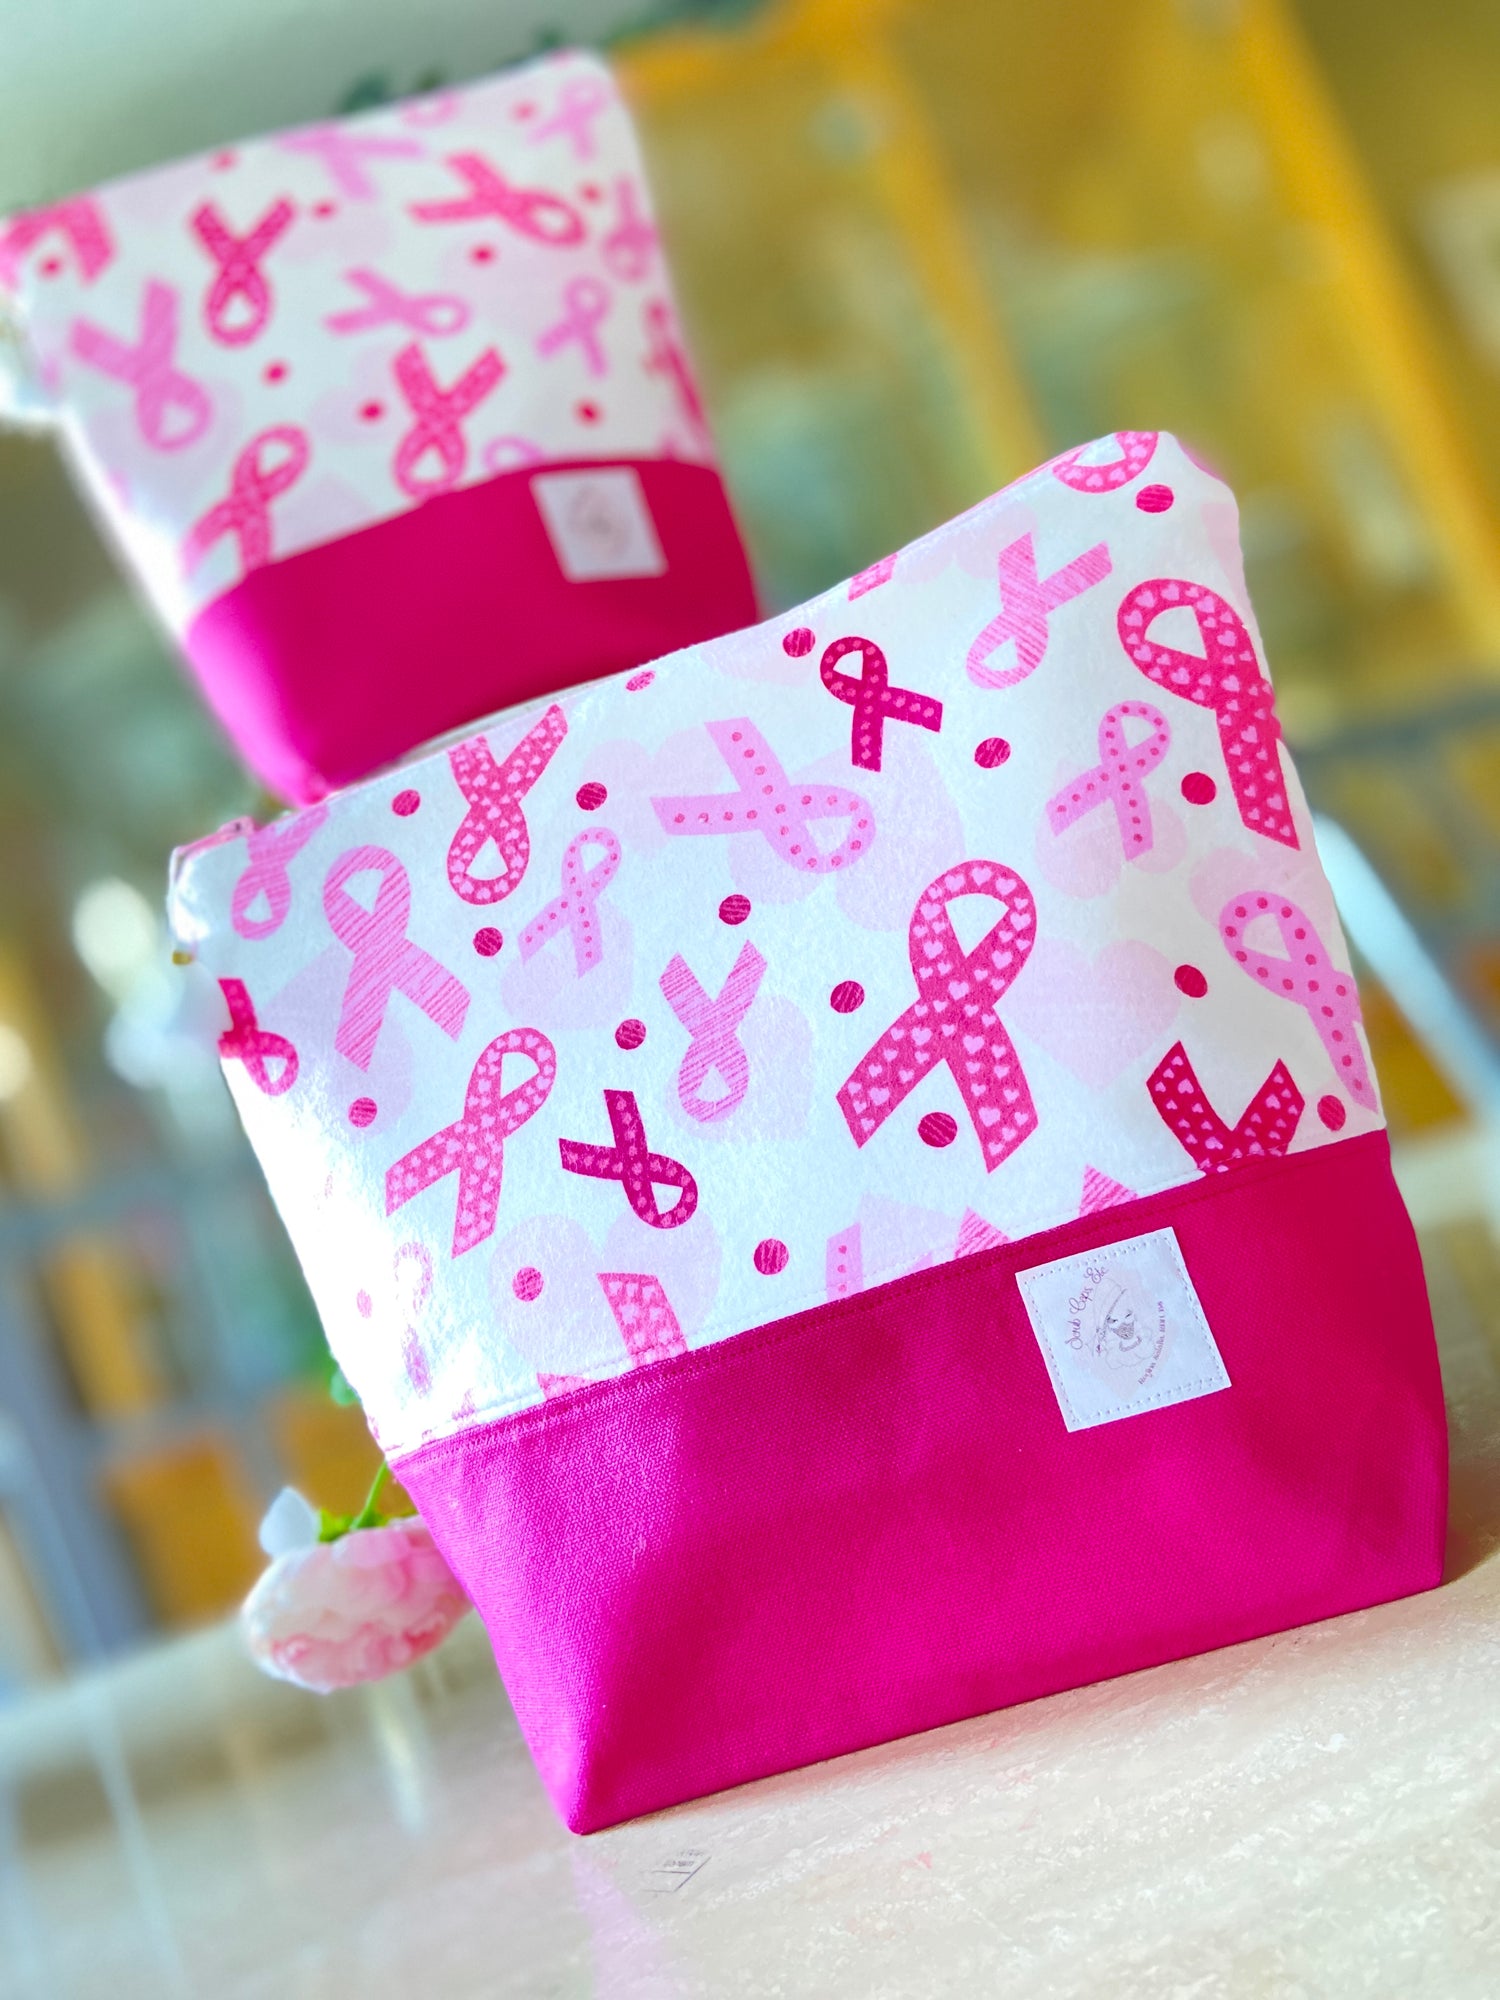 7 ways to do your part for Breast Cancer Awareness even from home   Options The Edge